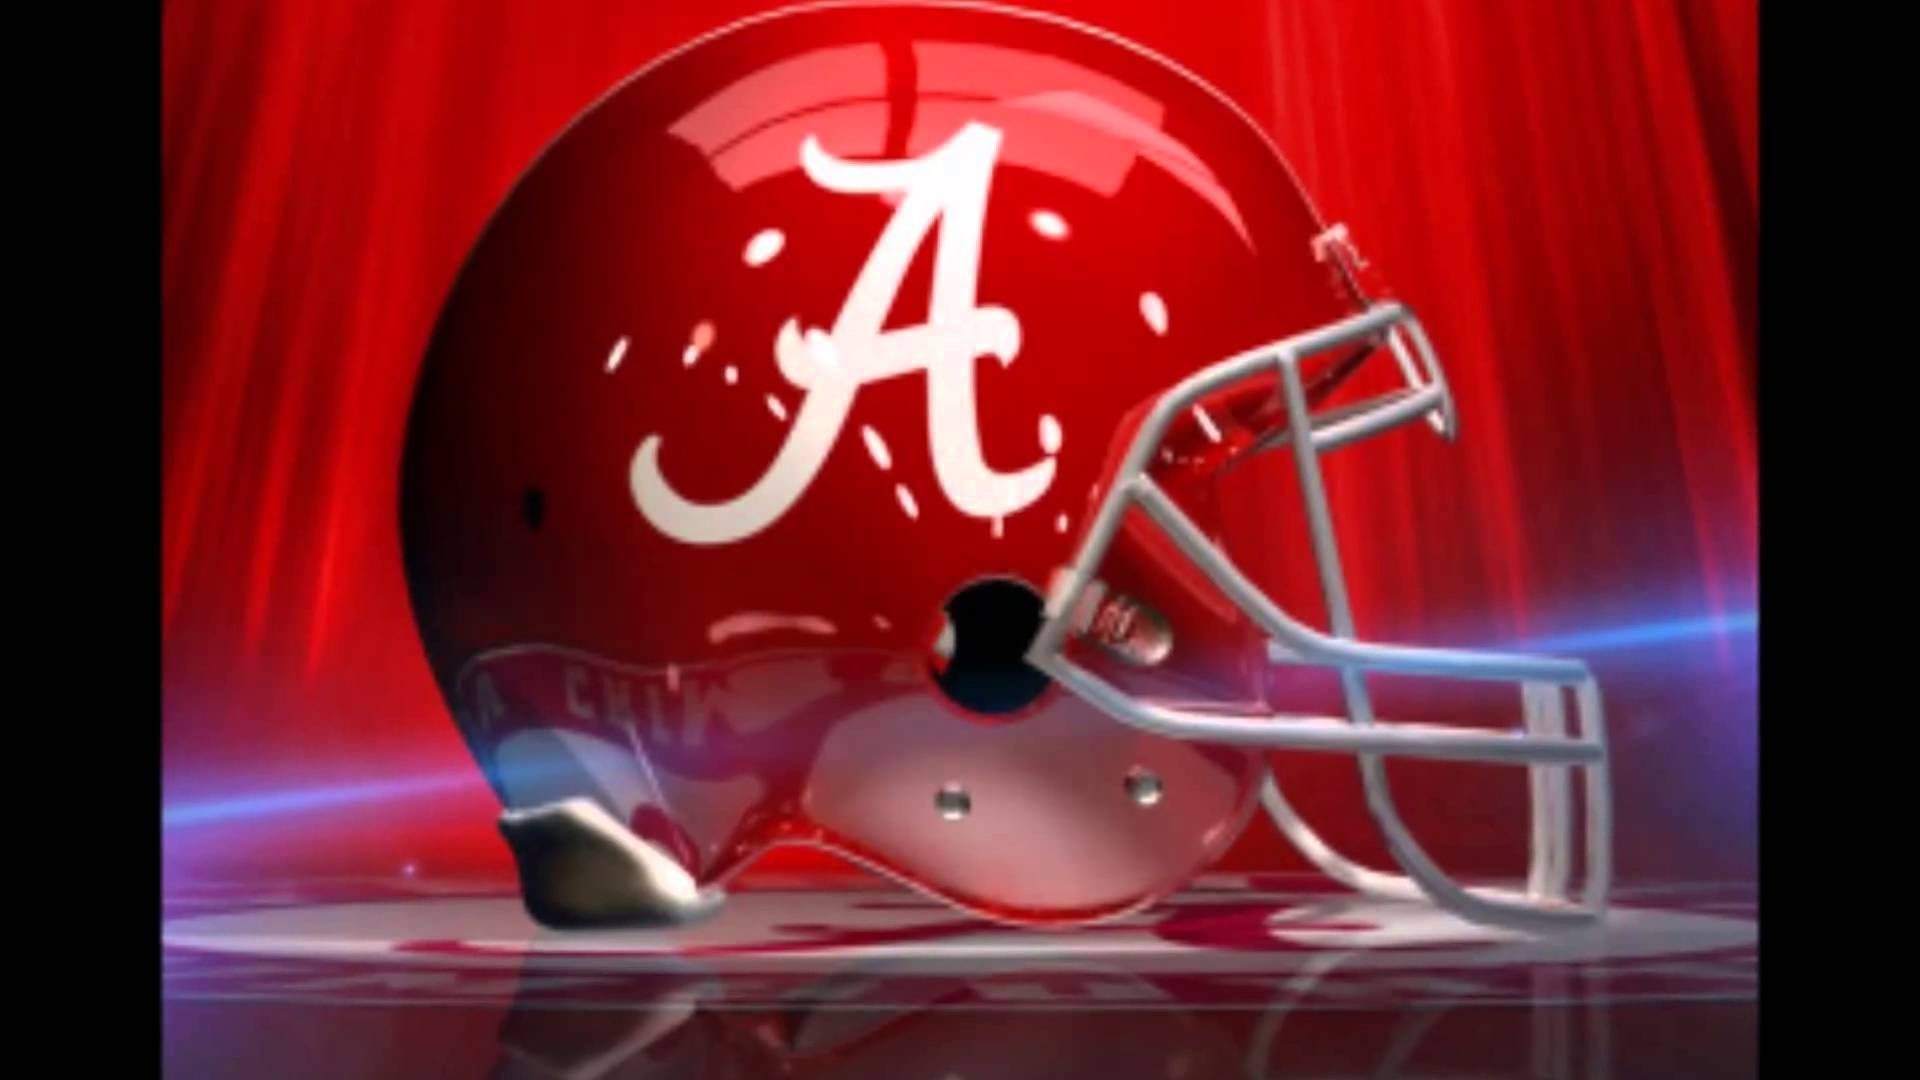 1920x1080  Alabama Football Wallpaper for PC – Full HD Pictures for PC &  Mac, Tablet